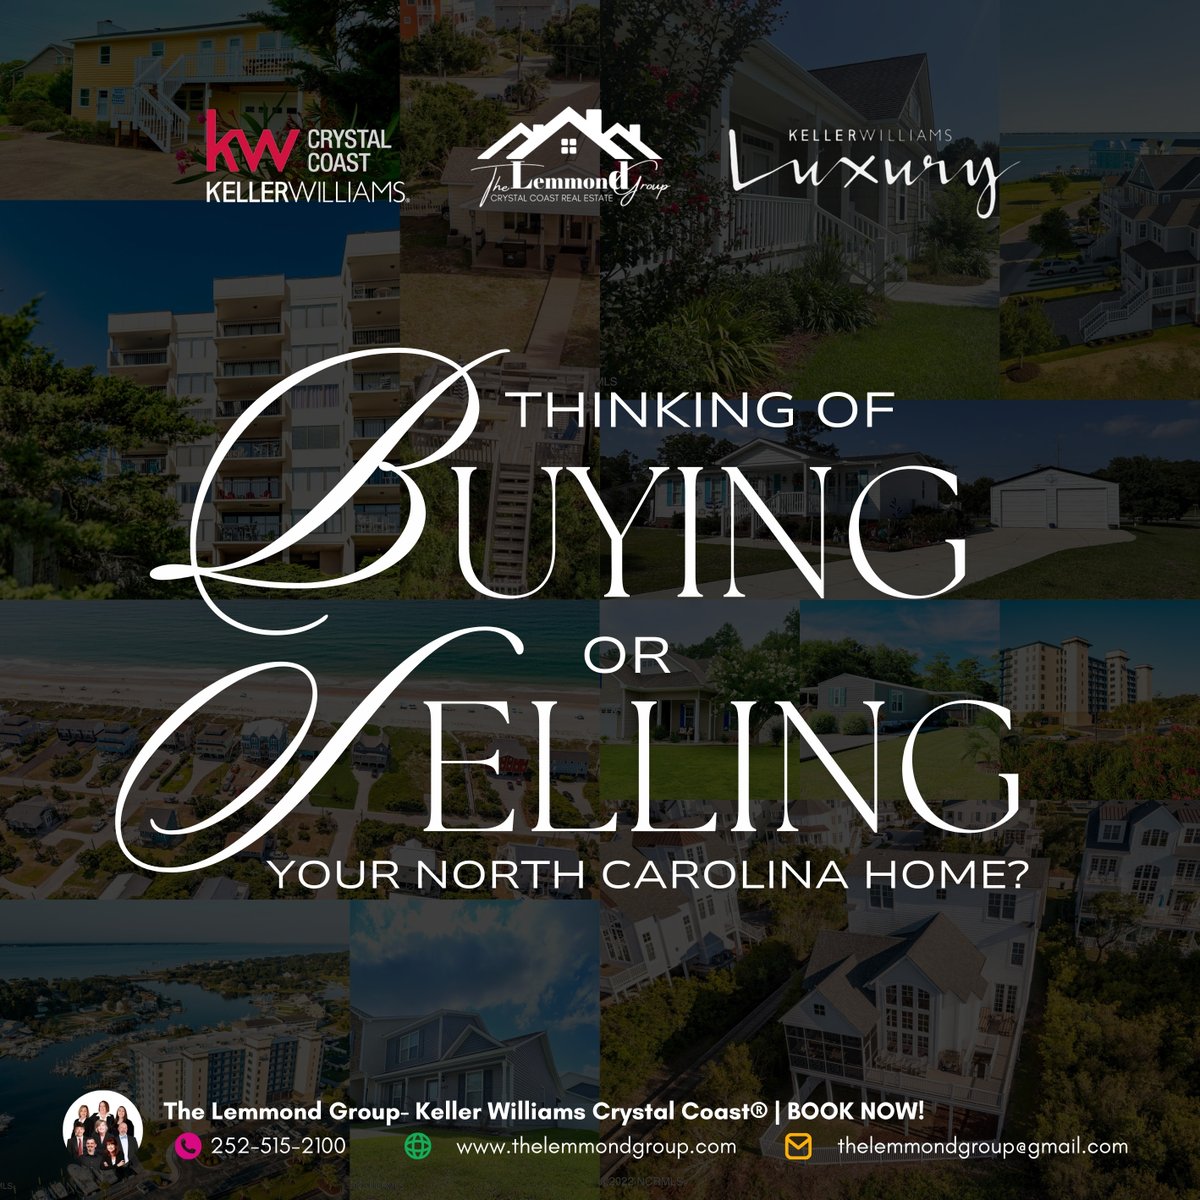 Making your real estate dreams a reality in North Carolina Crystal Coast! Get a 𝙁𝙍𝙀𝙀 home valuation and consultation NOW! 💥 #ncrealestate  #realestateinvestment #beachliving #coastalliving #beachfrontbargainhunt #kwcc #crystalcoasthomes #coastalhome #beachproperty